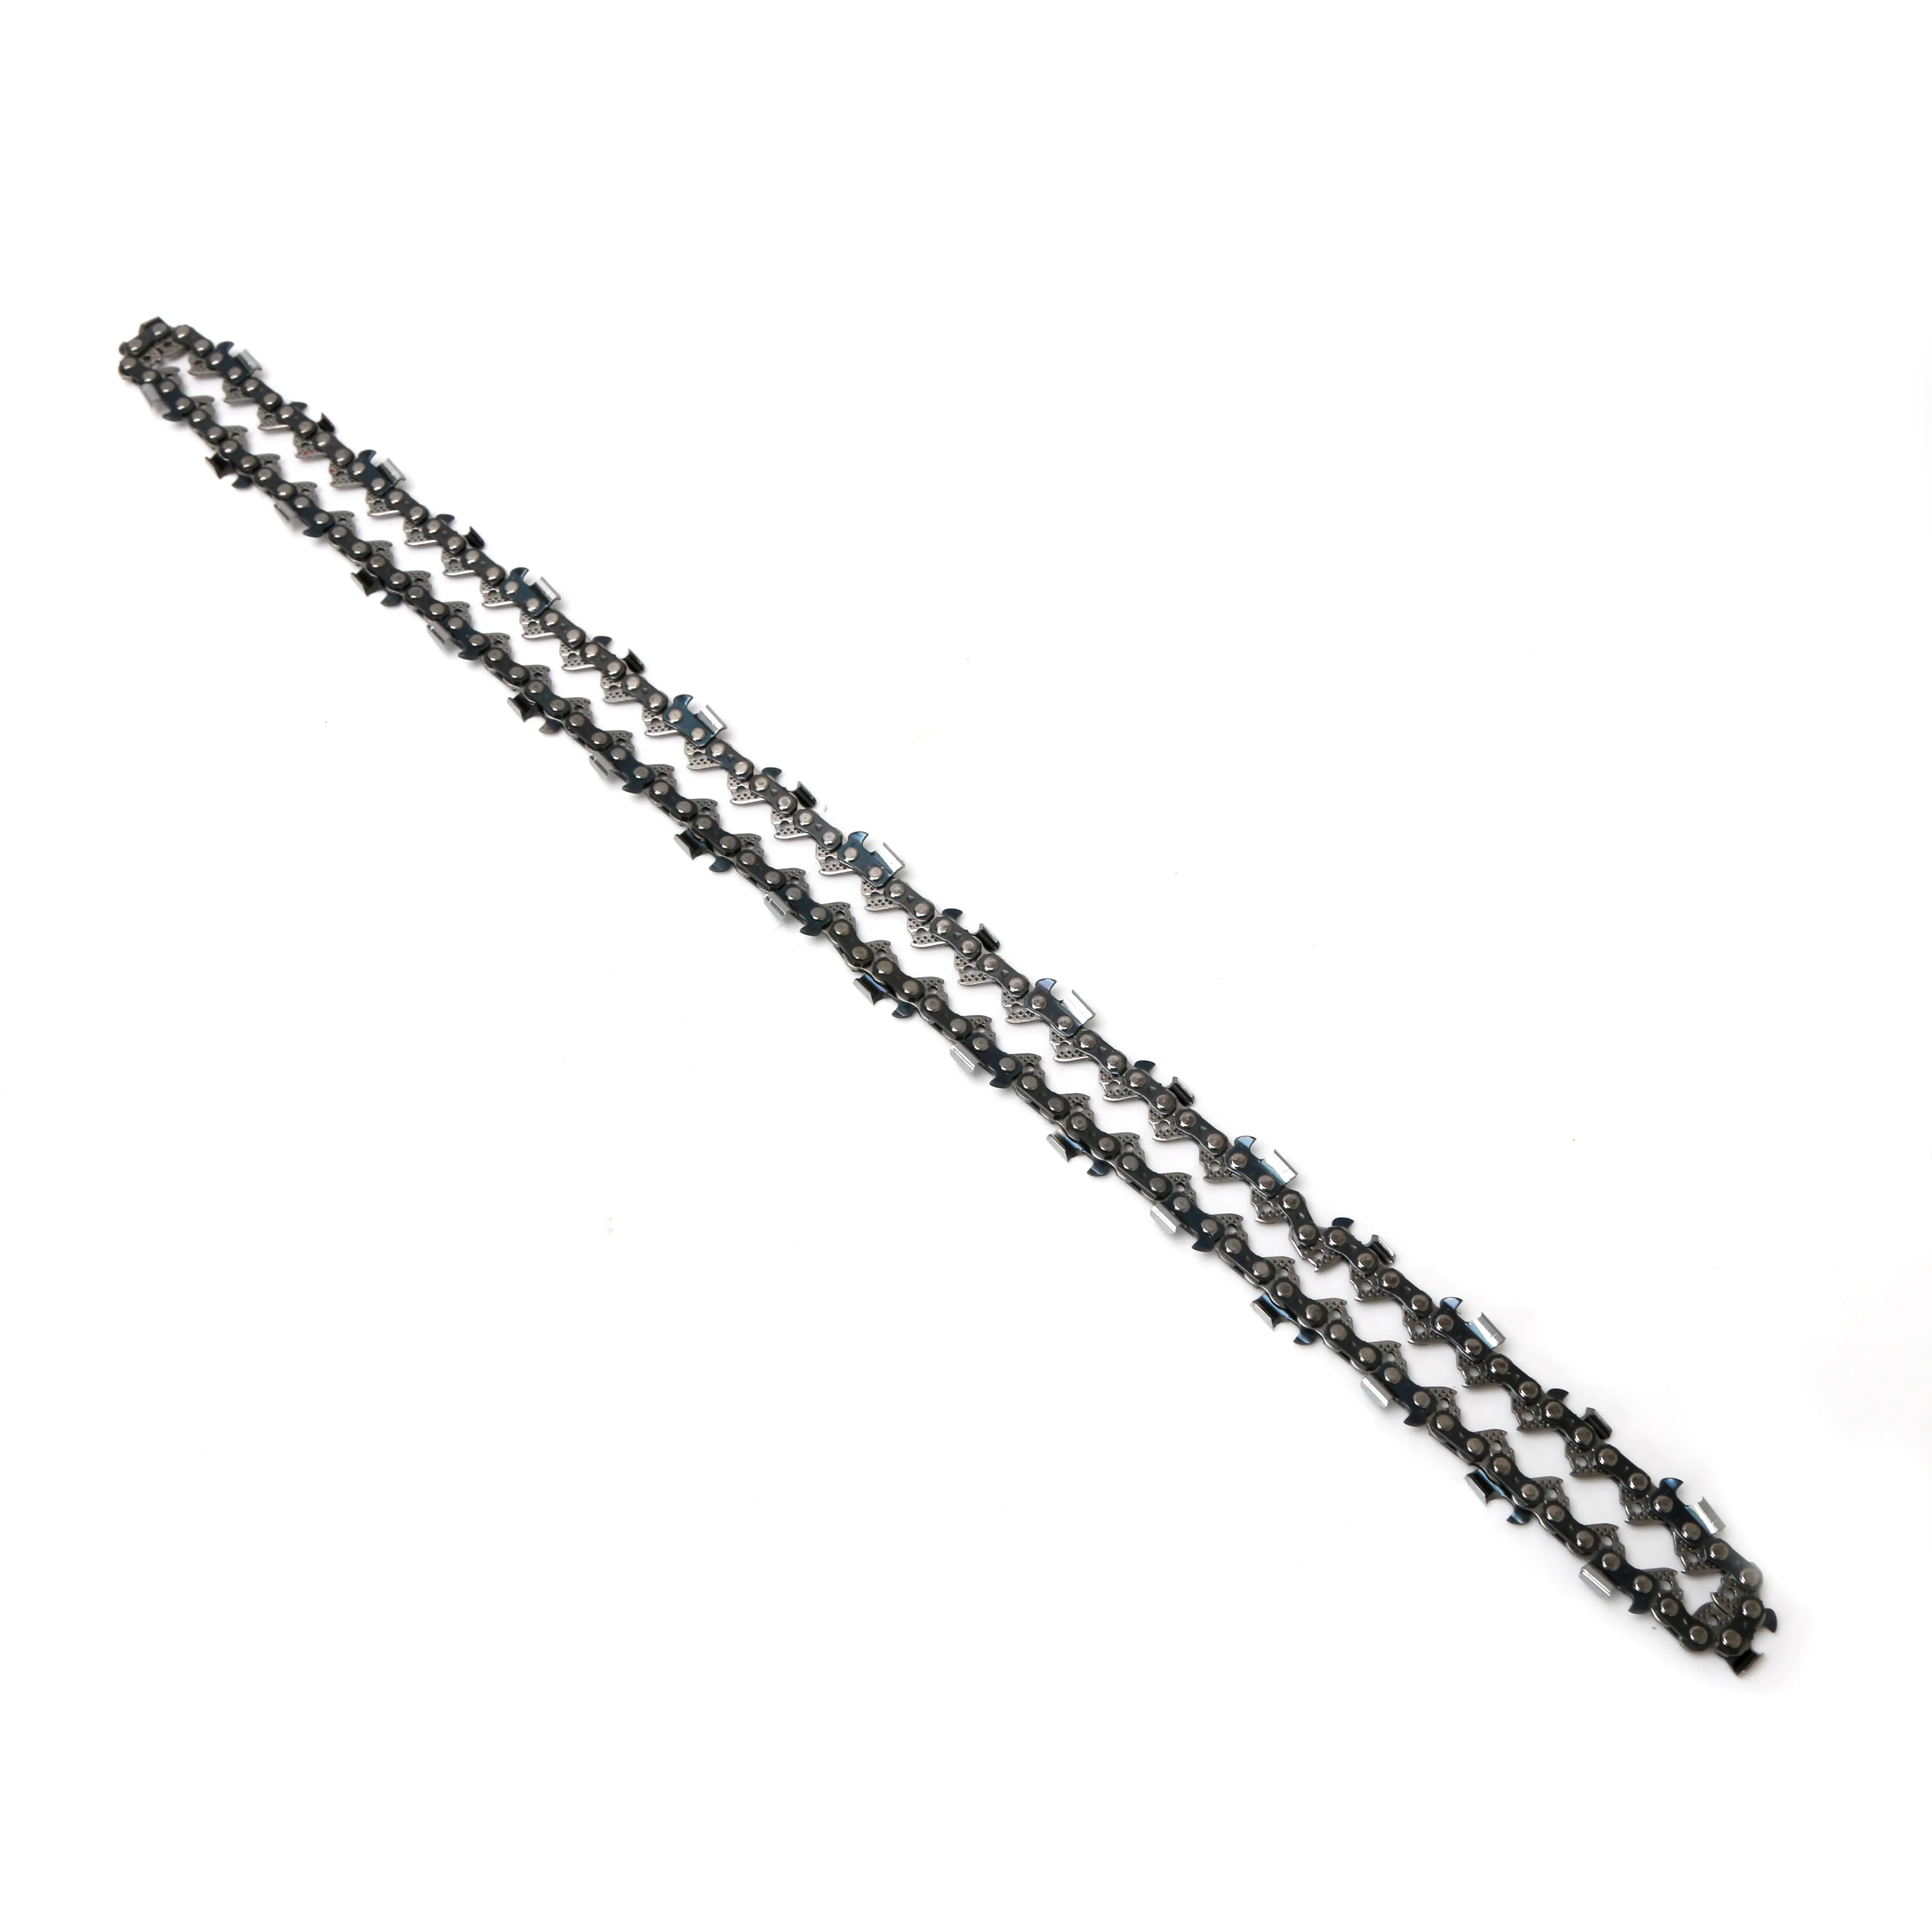 Hot sales new technology 325-058-66dl semi chisel saw chain for chainsaw